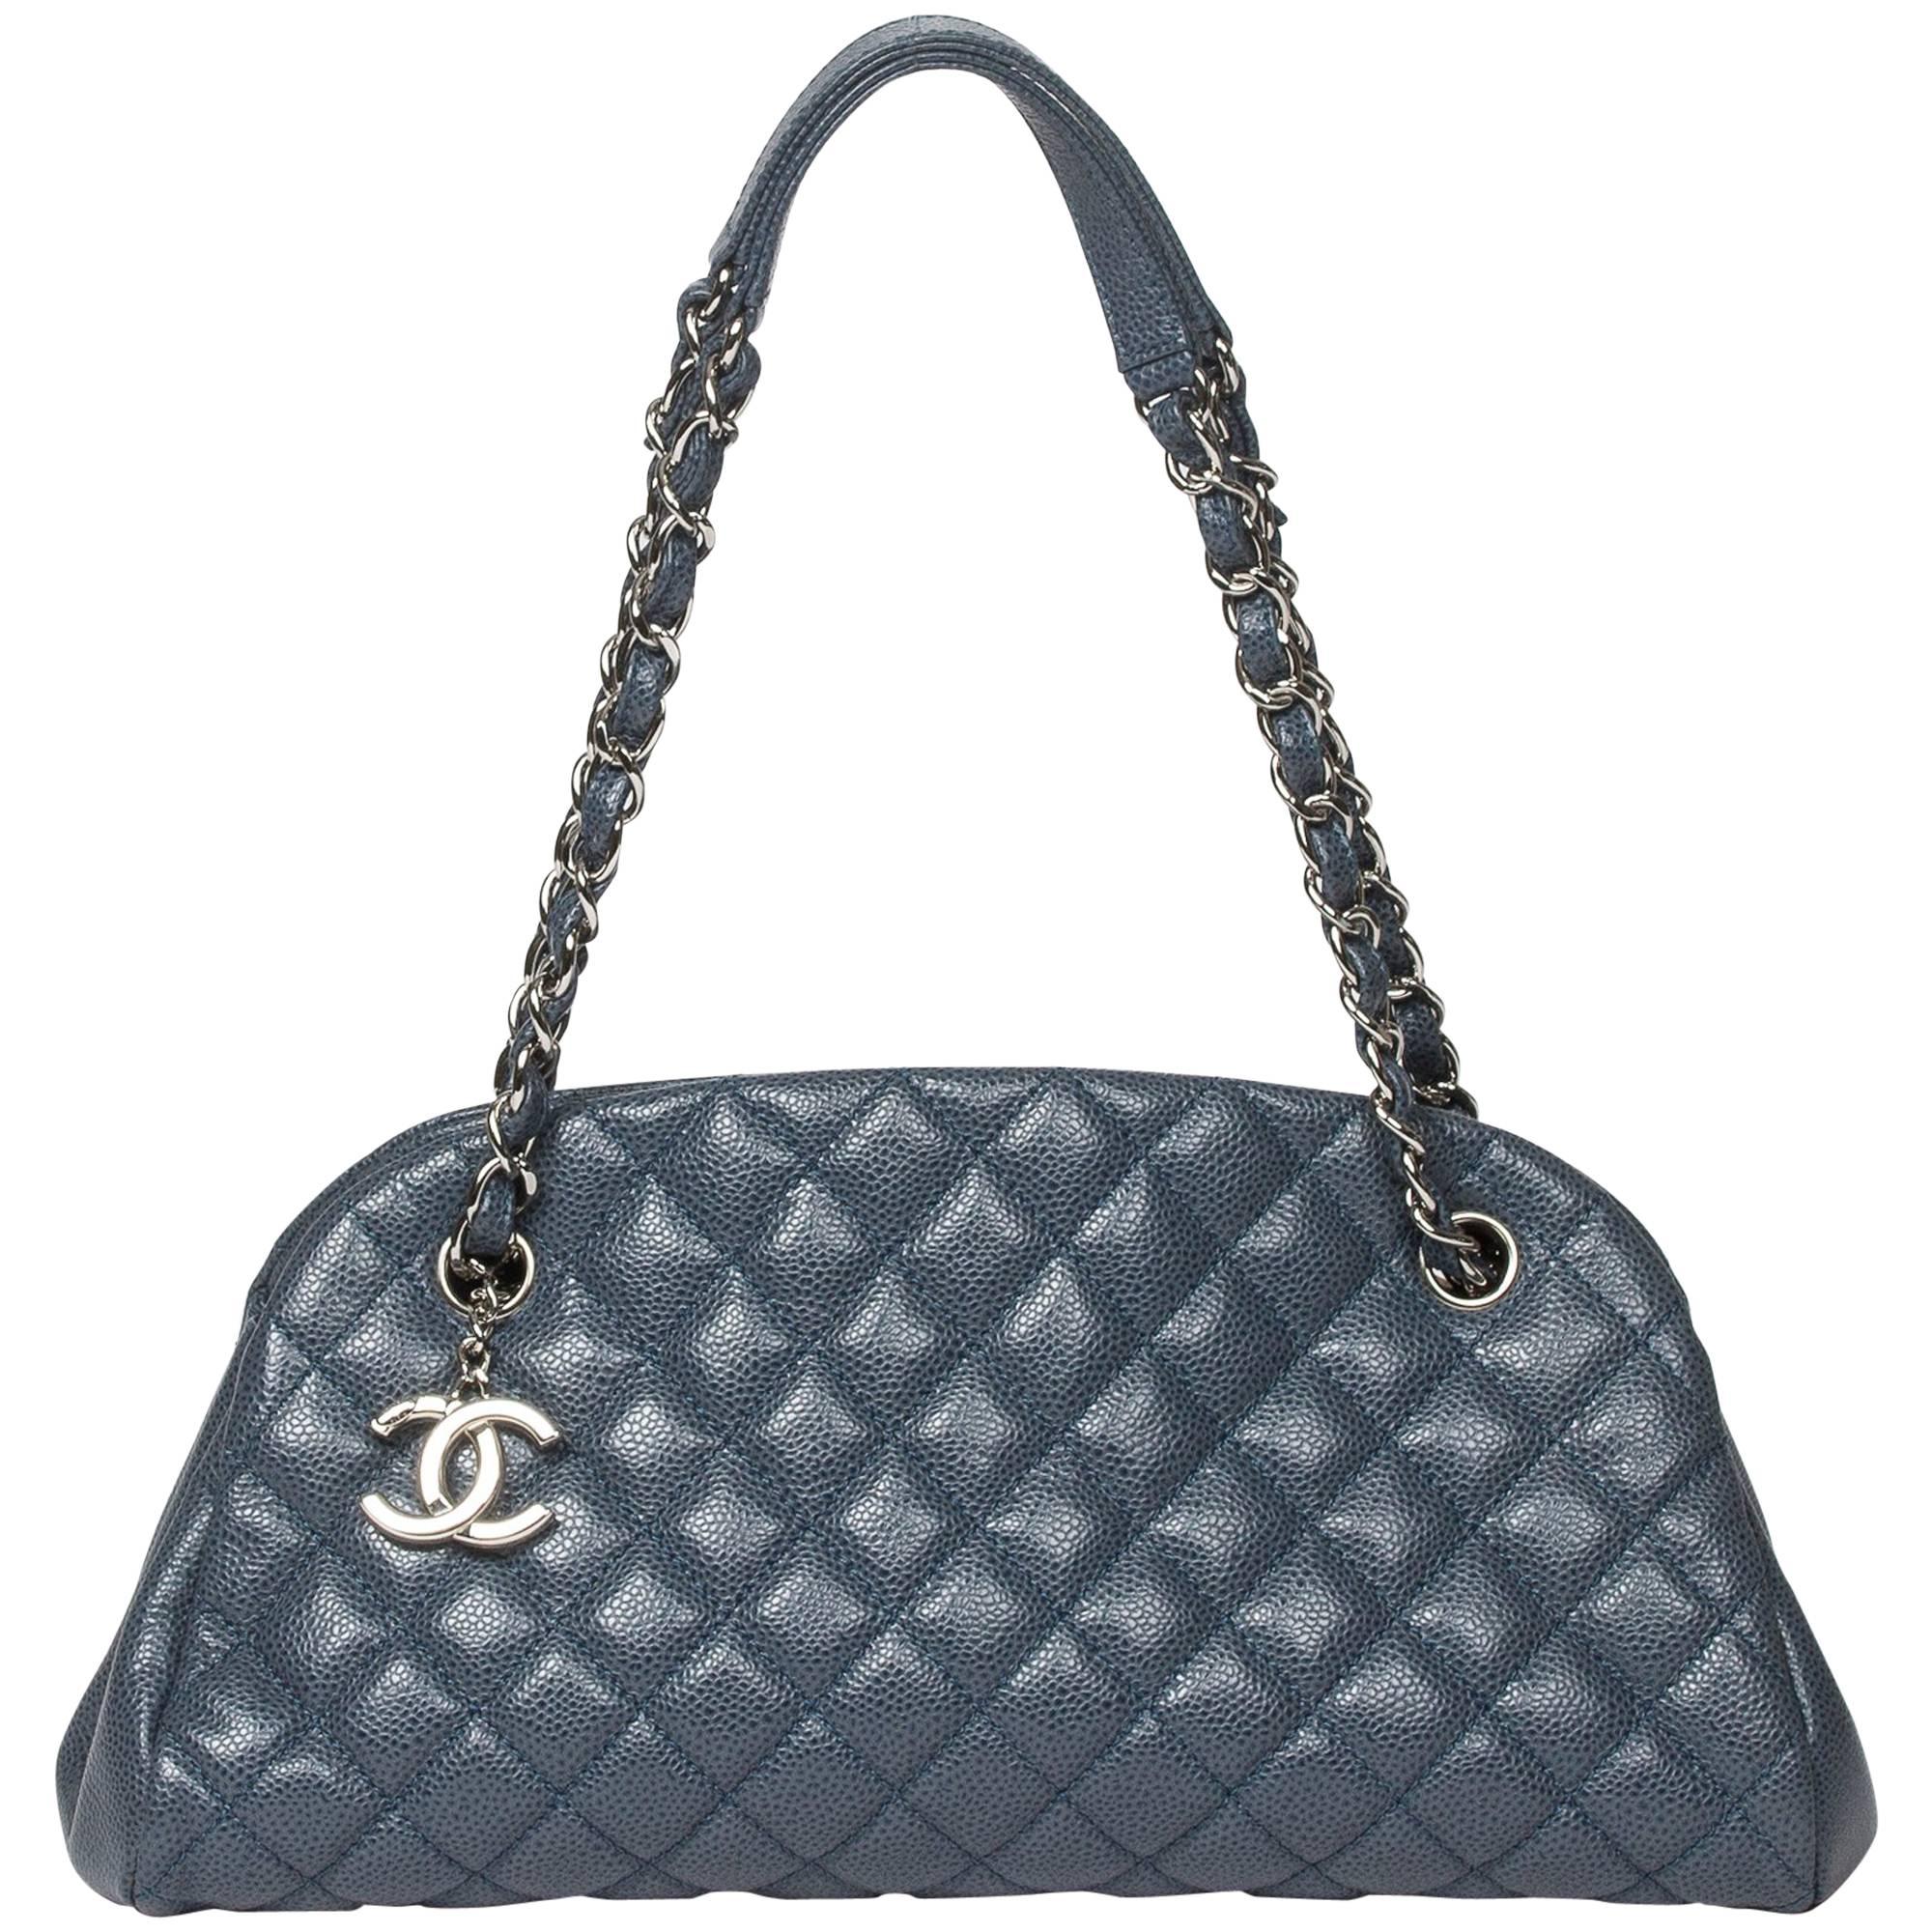 Chanel Handbag in light blue caviar quilted calf leather